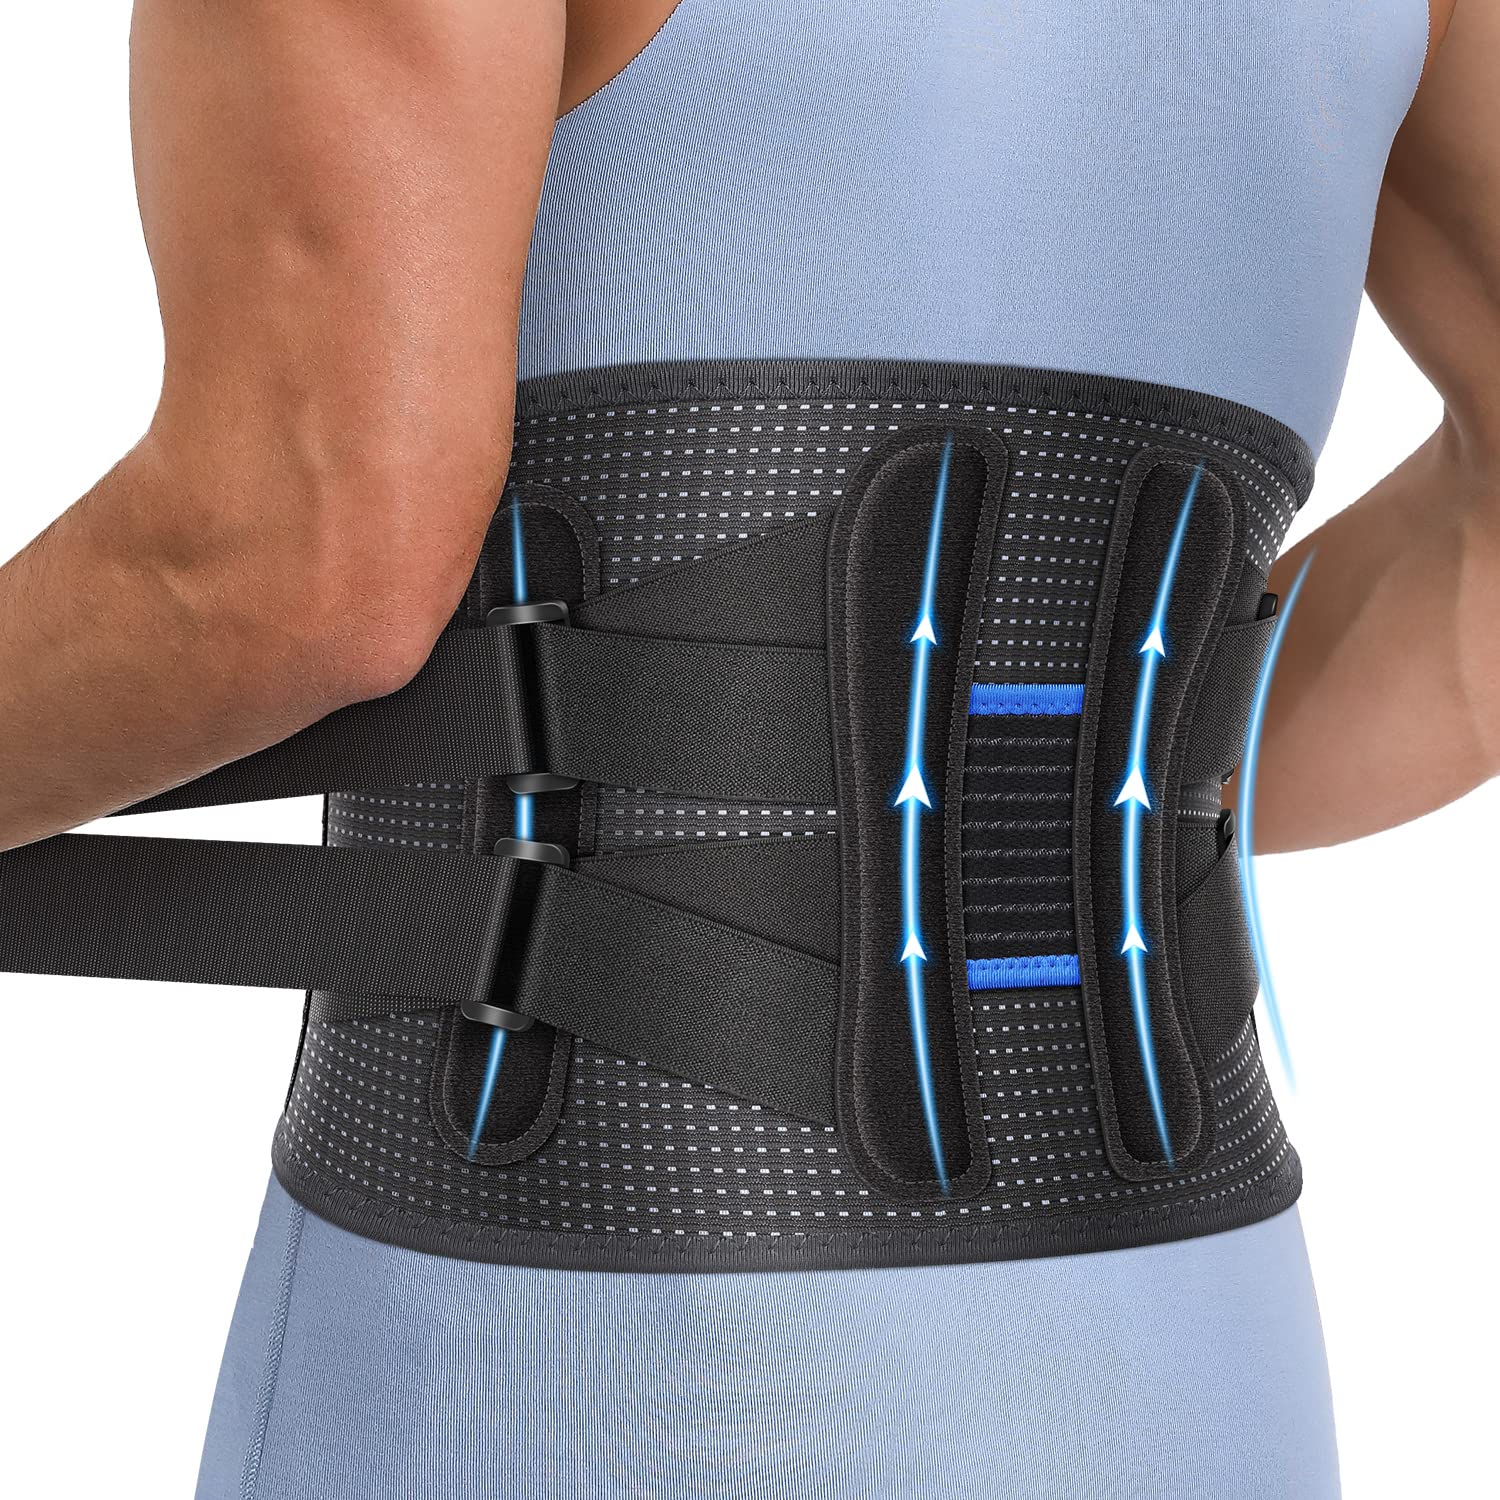 Back Brace for Lower Back Pain - 2022 Upgrade Back Lumbar Support Belt for Men Lower Back Pain Relief, Herniated Disc, Sciatica, Scoliosis, 360° Max